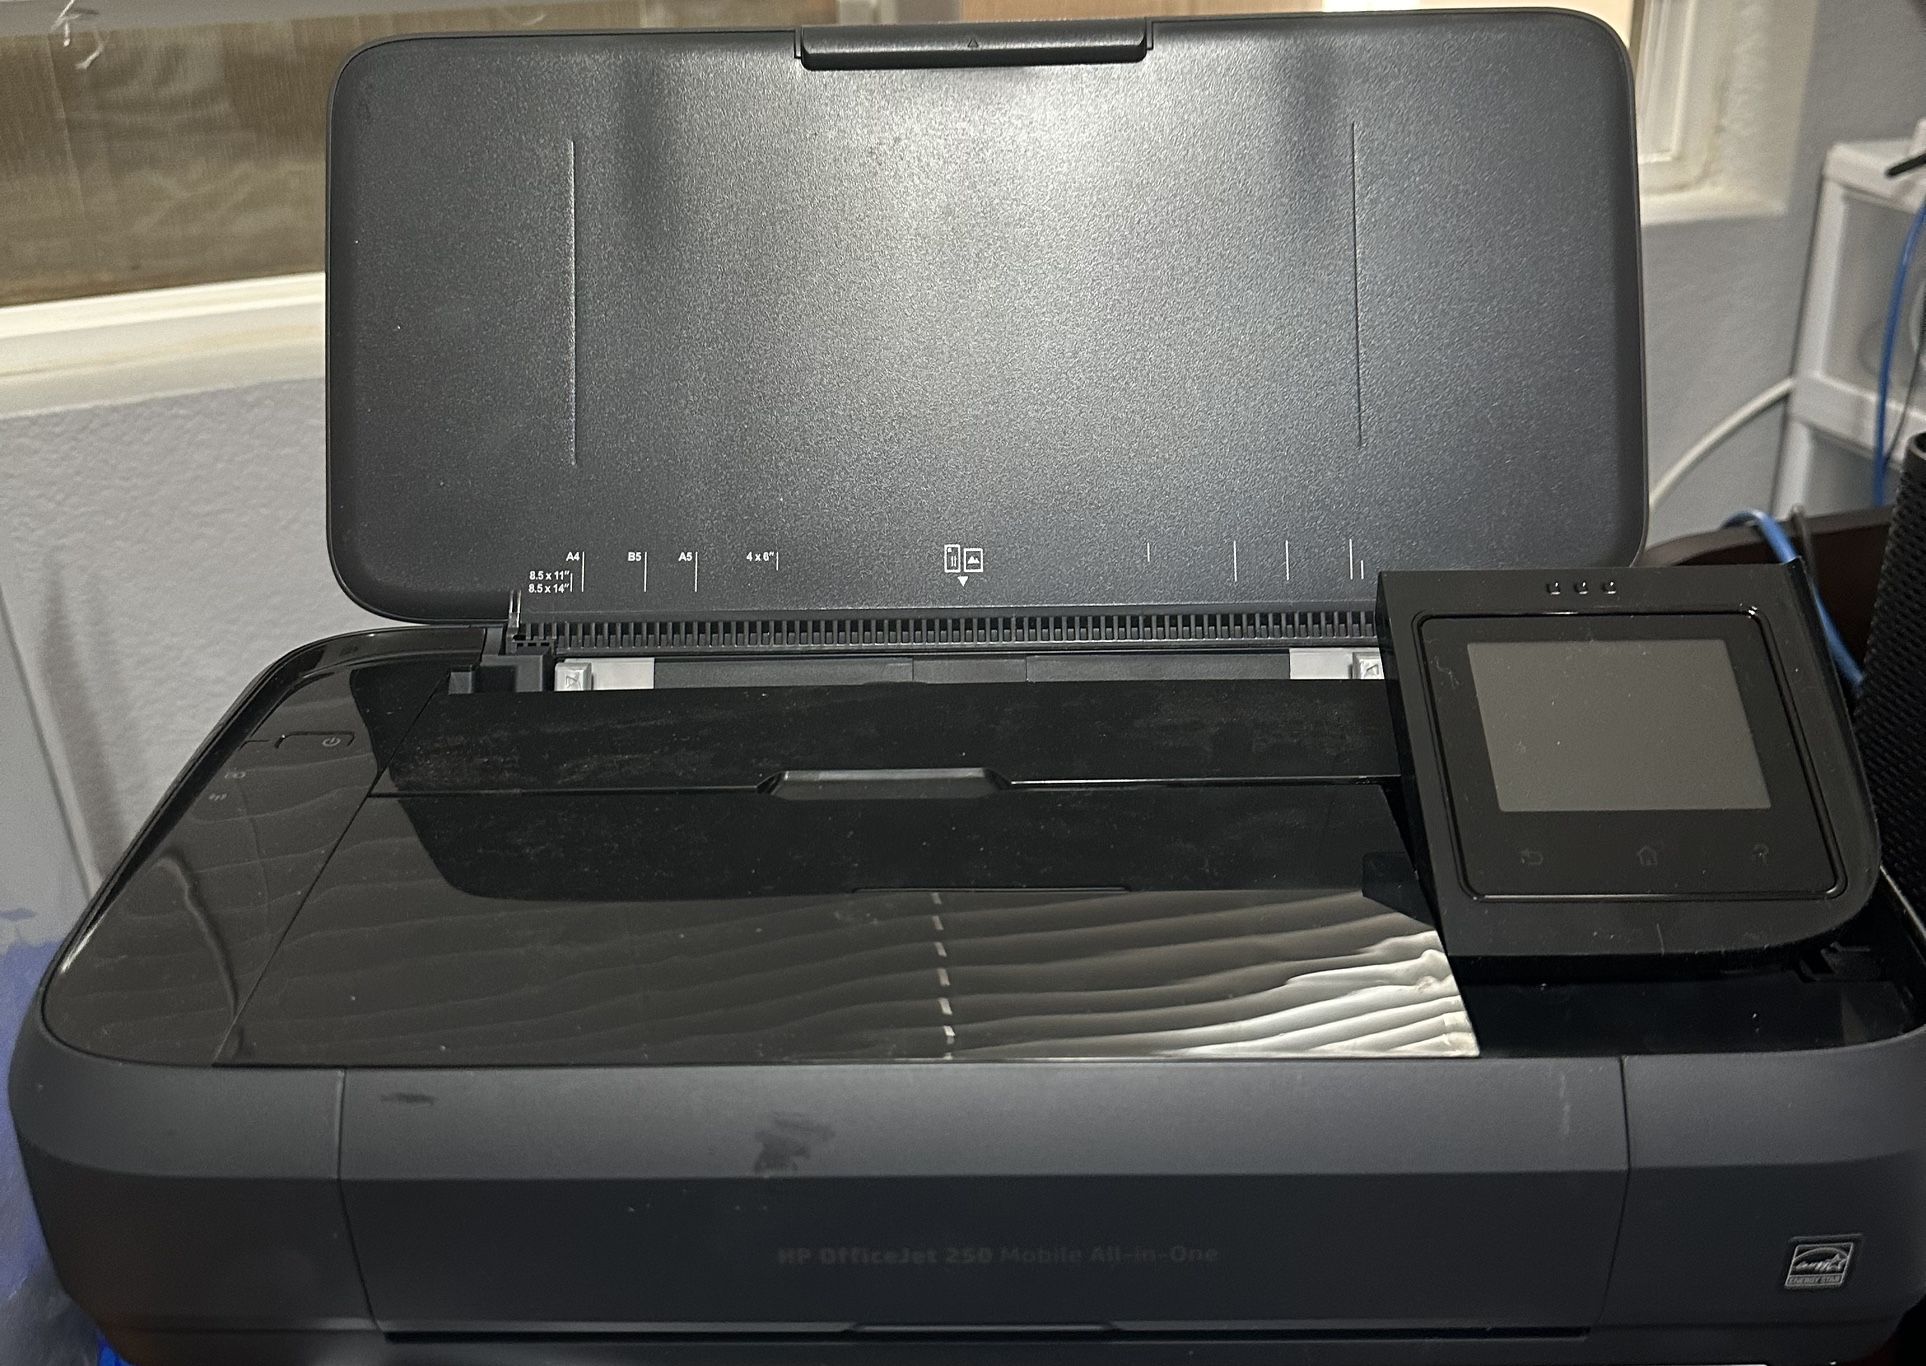 HP Officer 250 Mobile All-in-one Printer